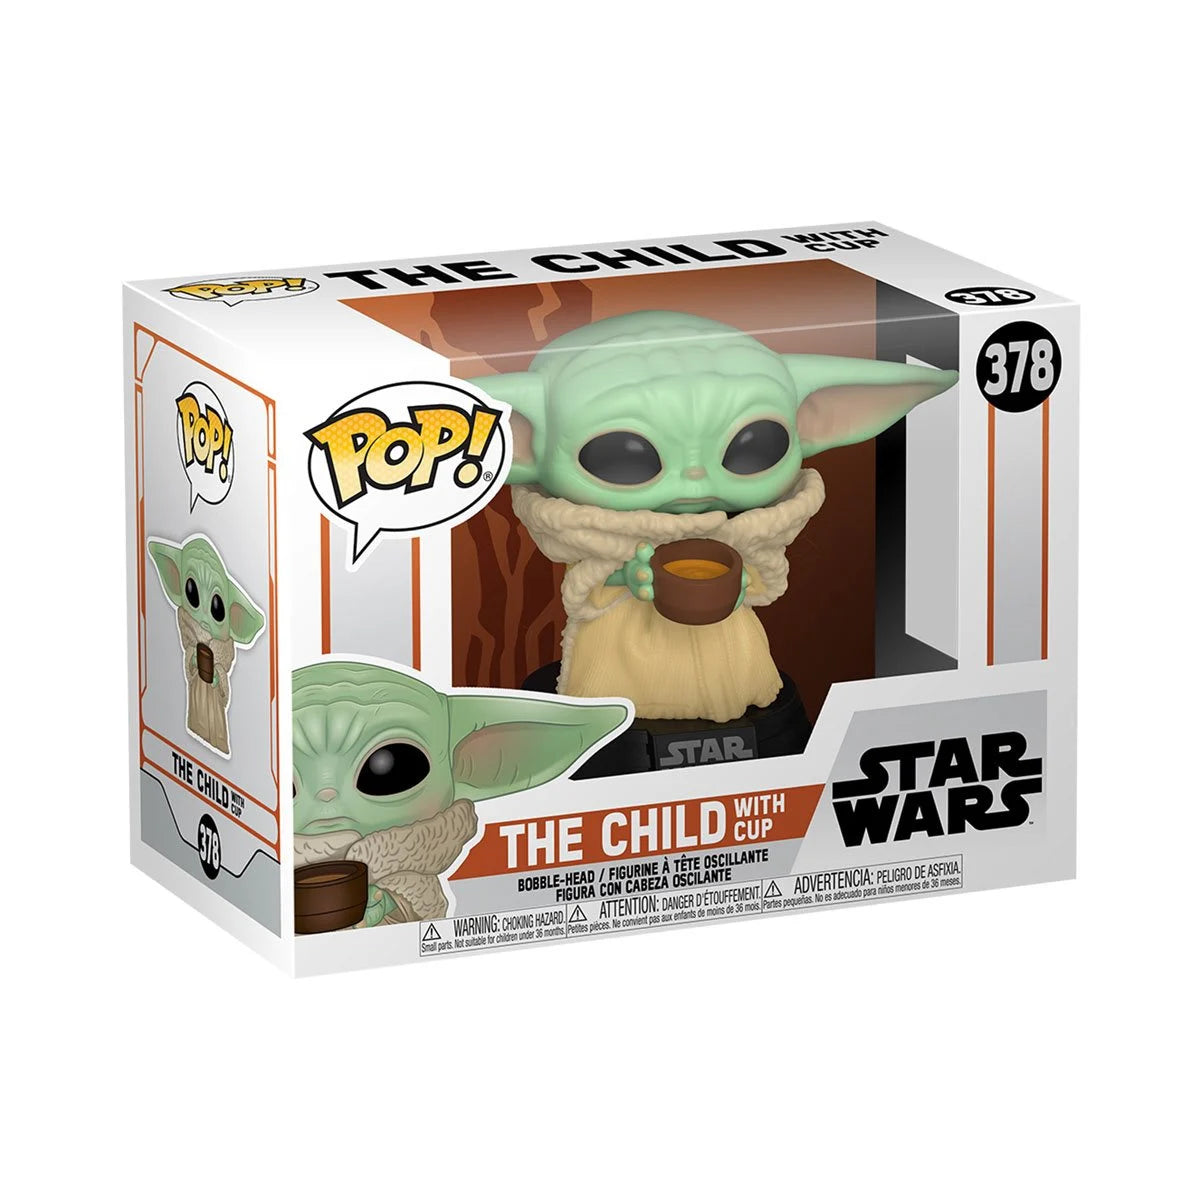 The Child with Cup Star Wars: The Mandalorian Pop! Vinyl Figure